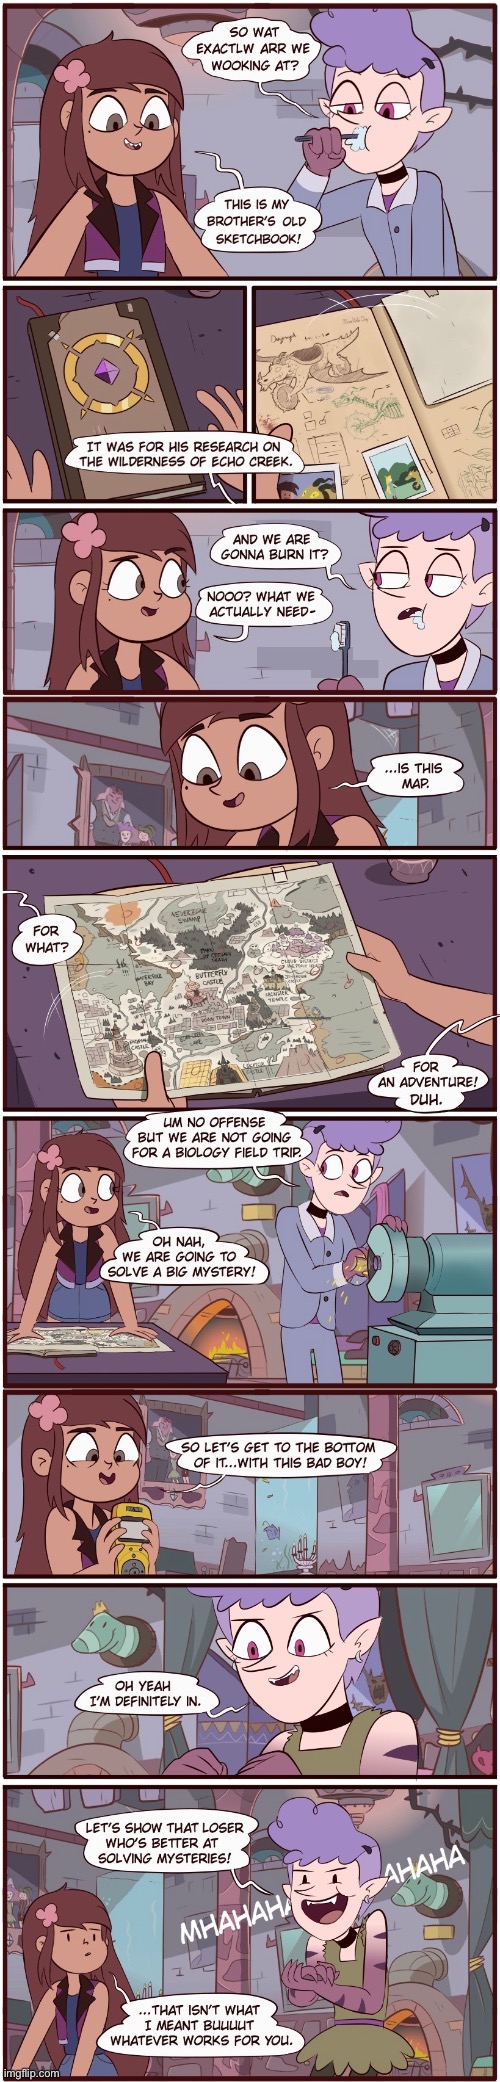 Echo Creek: A Tale of Two Butterflies: Chapter 2: The Half Way (Part 4) | image tagged in morningmark,svtfoe,comics/cartoons,star vs the forces of evil,comics,memes | made w/ Imgflip meme maker